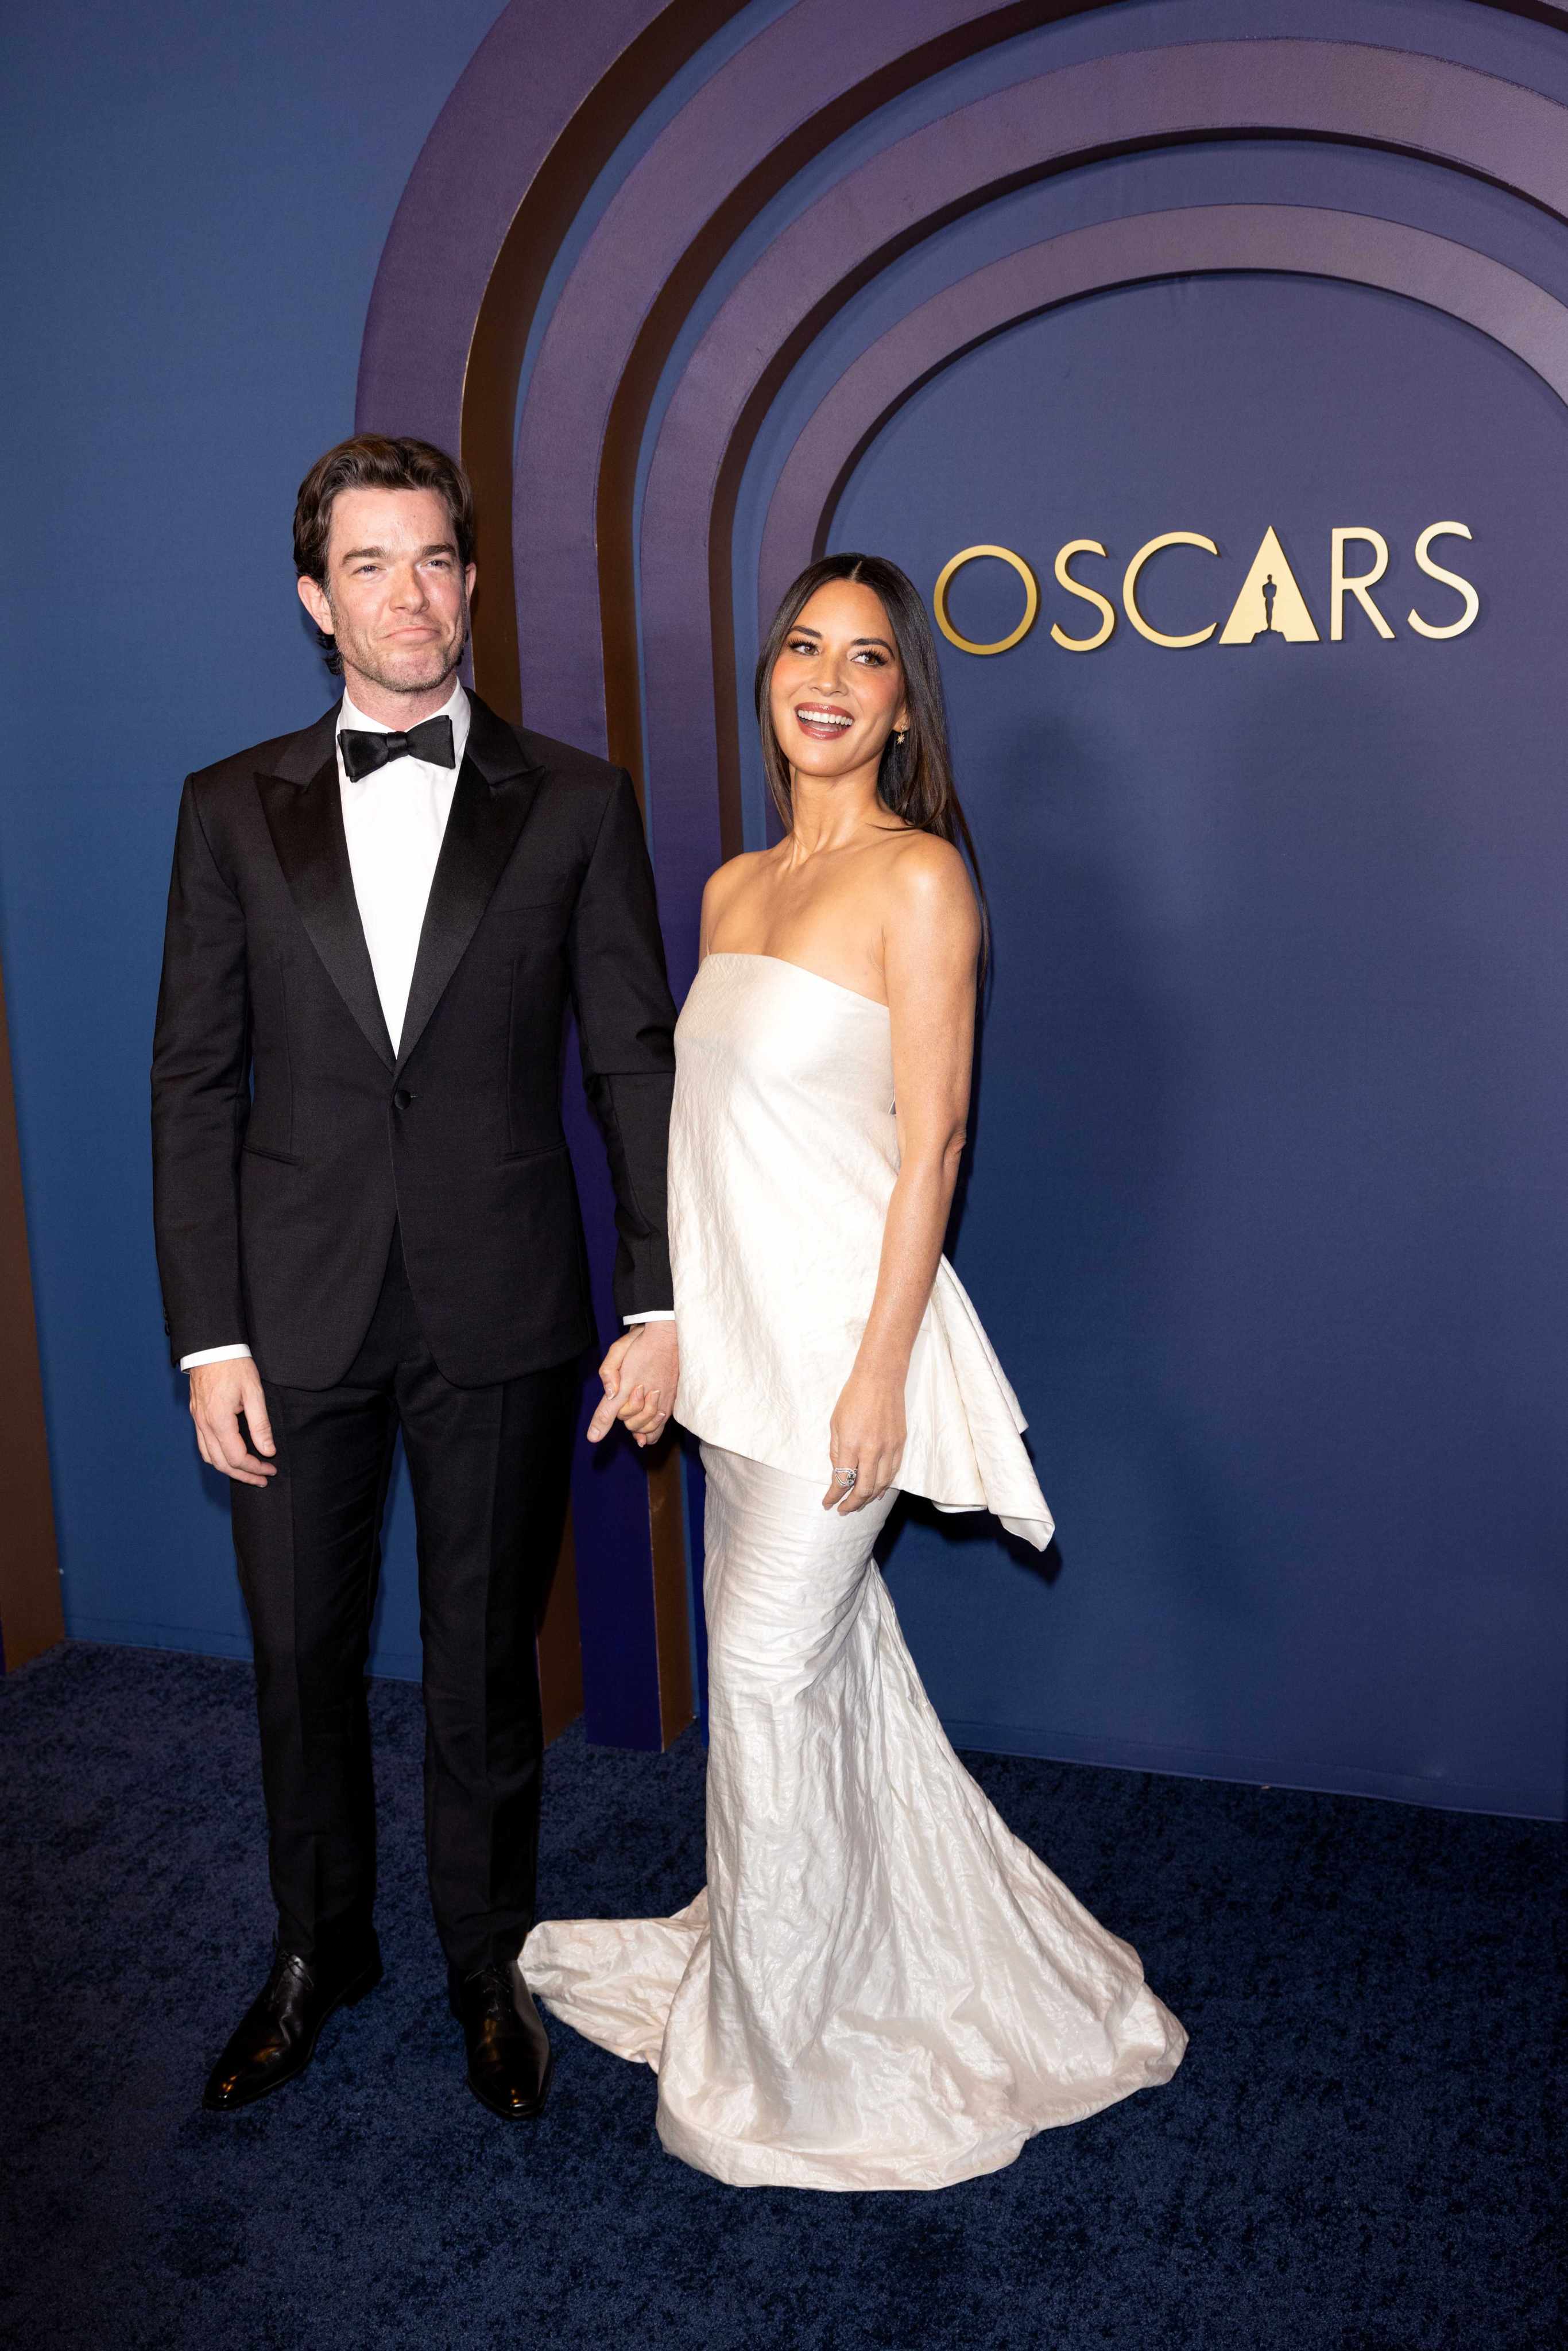 John Mulaney and Olivia Munn recently made their first red carpet appearance together ... so what do we know about their relationship? Photo: Los Angeles Times via Getty Images